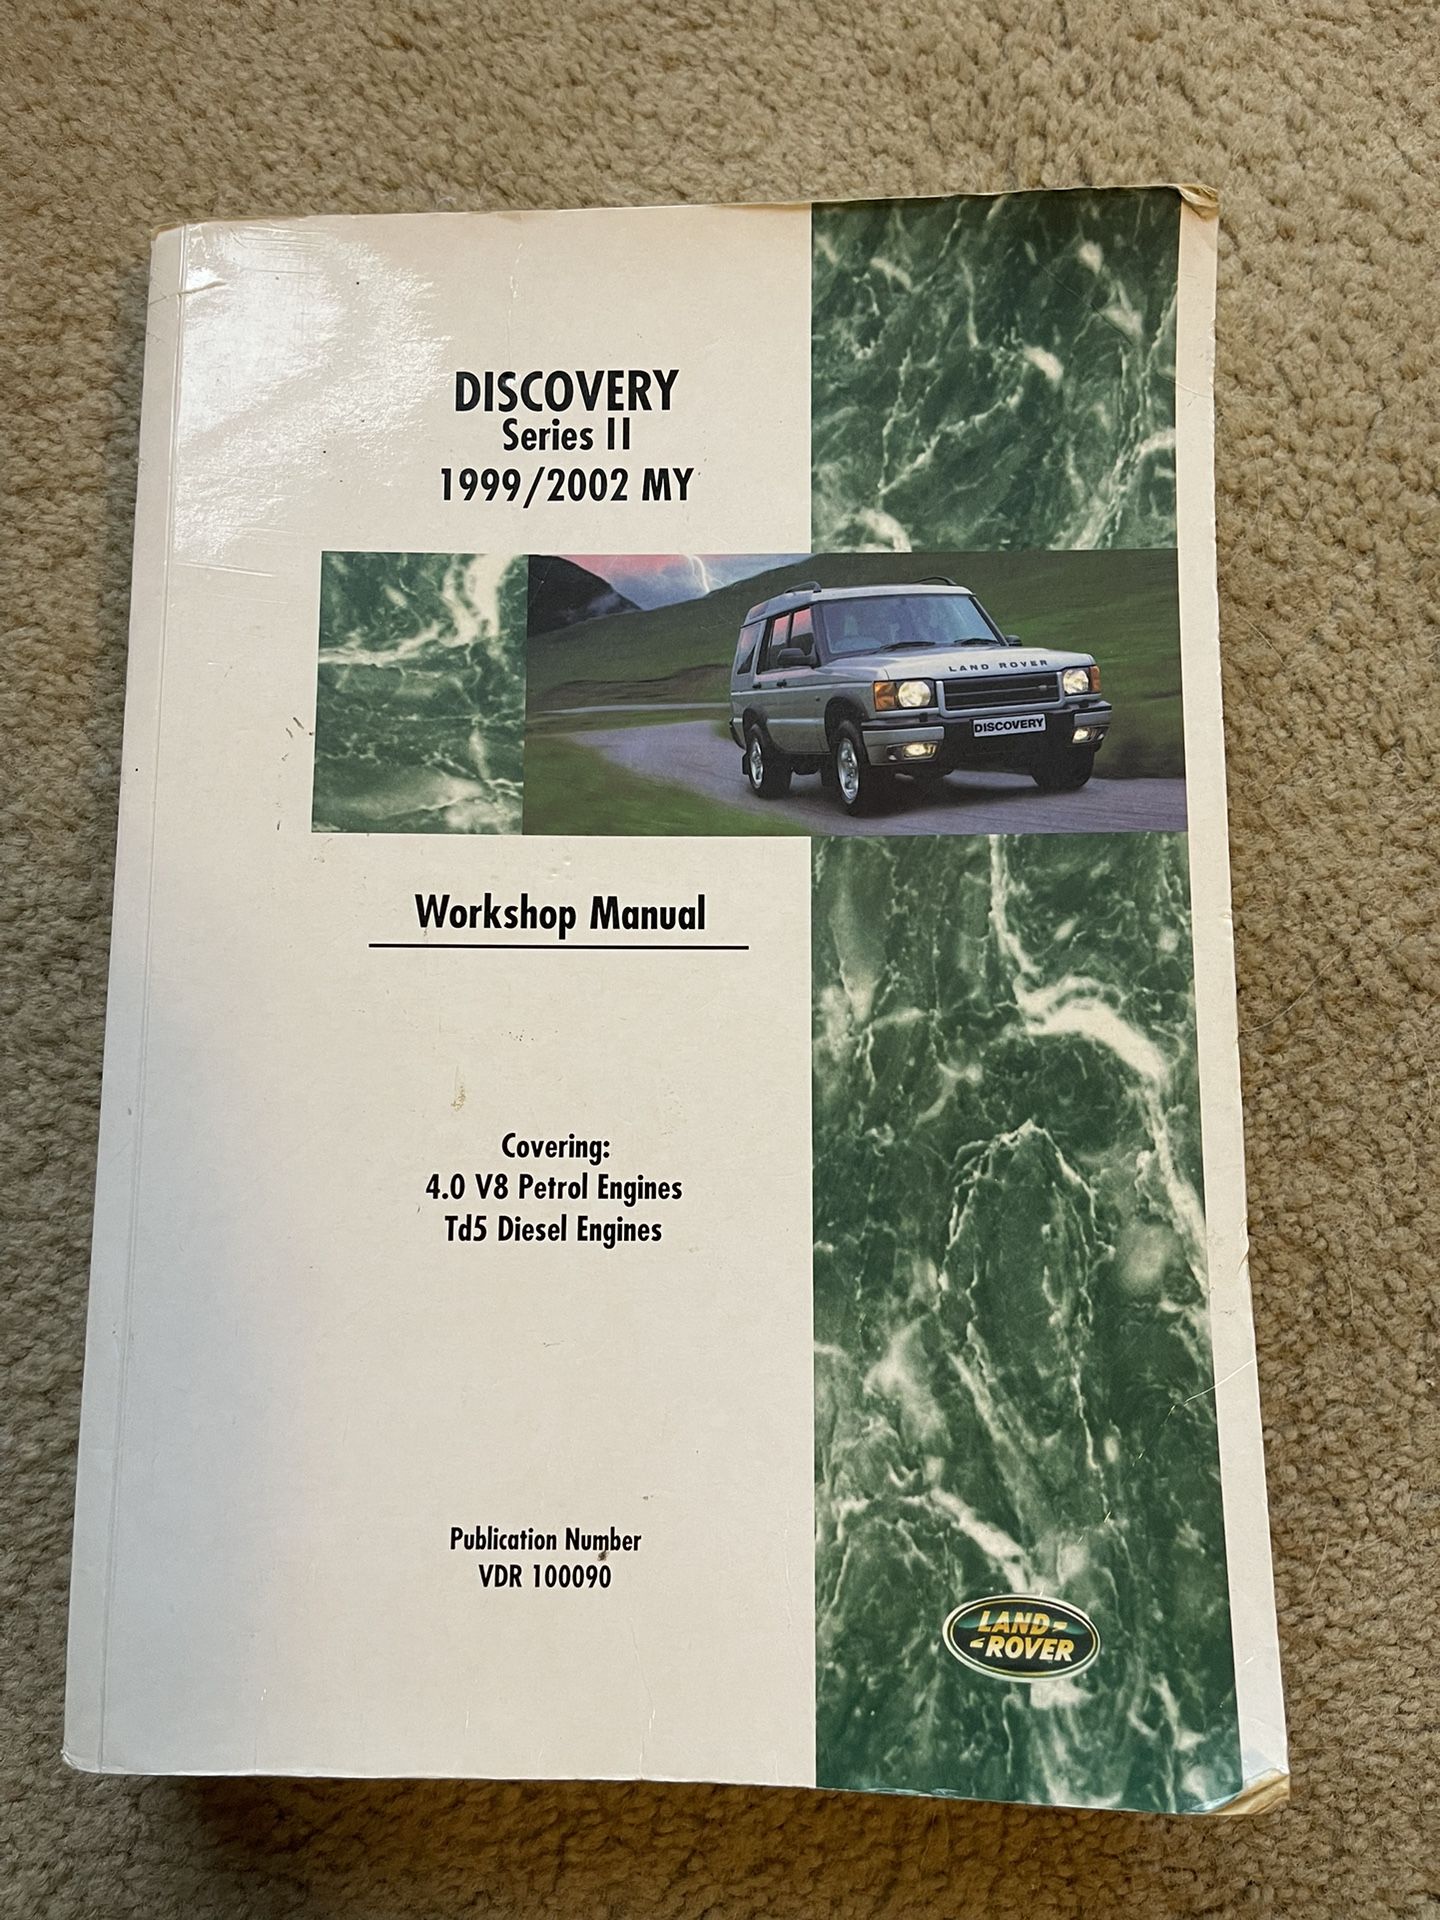 Land Rover Discovery ll Workshop Manual